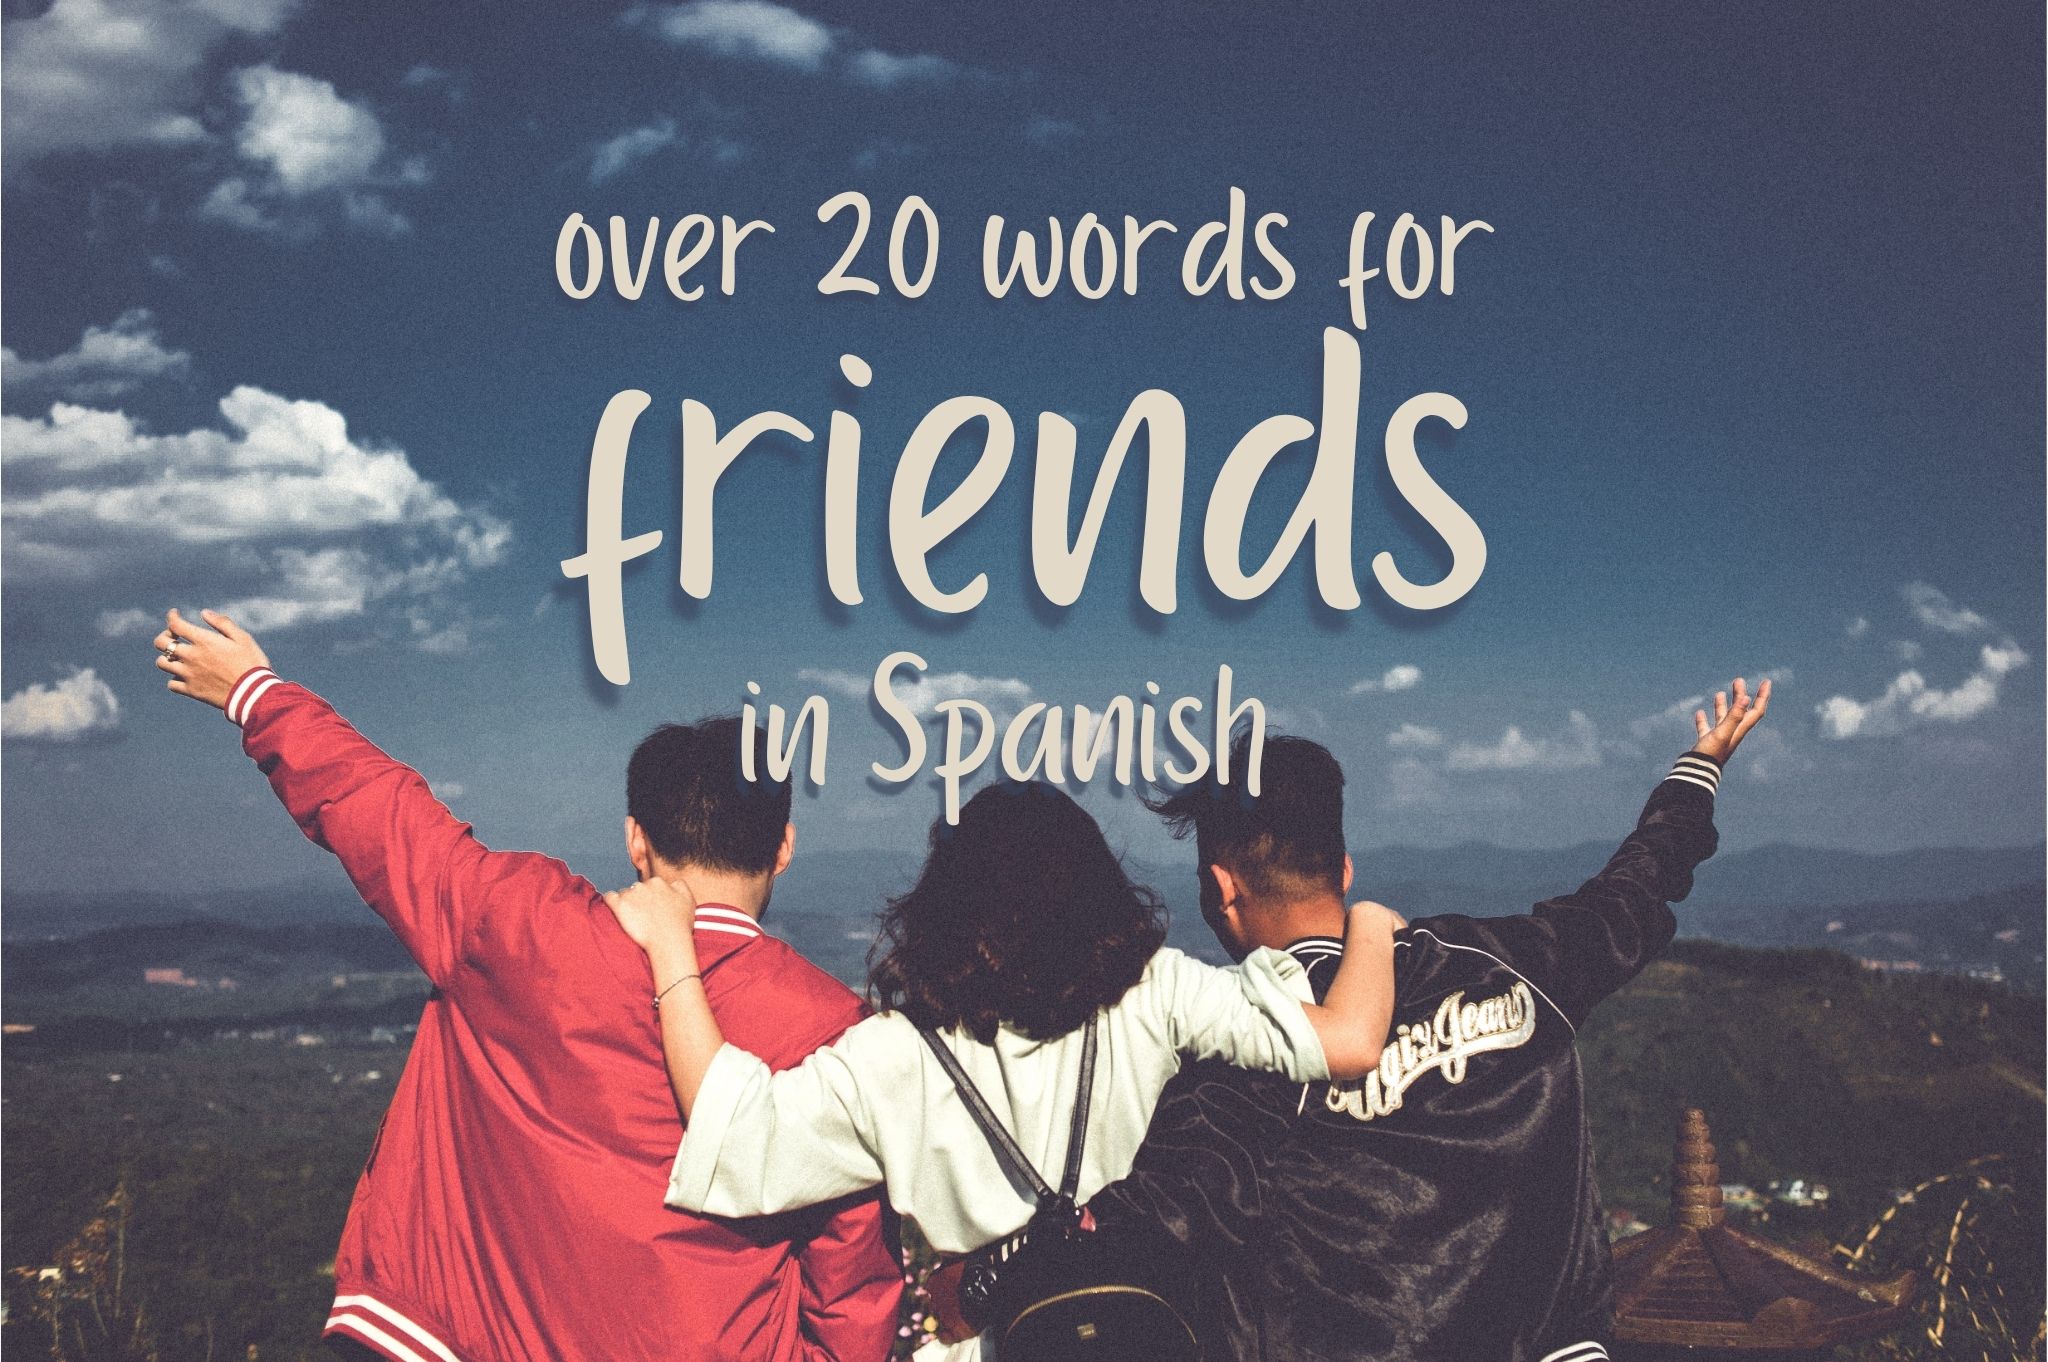 Over 20 words for Friend in Spanish